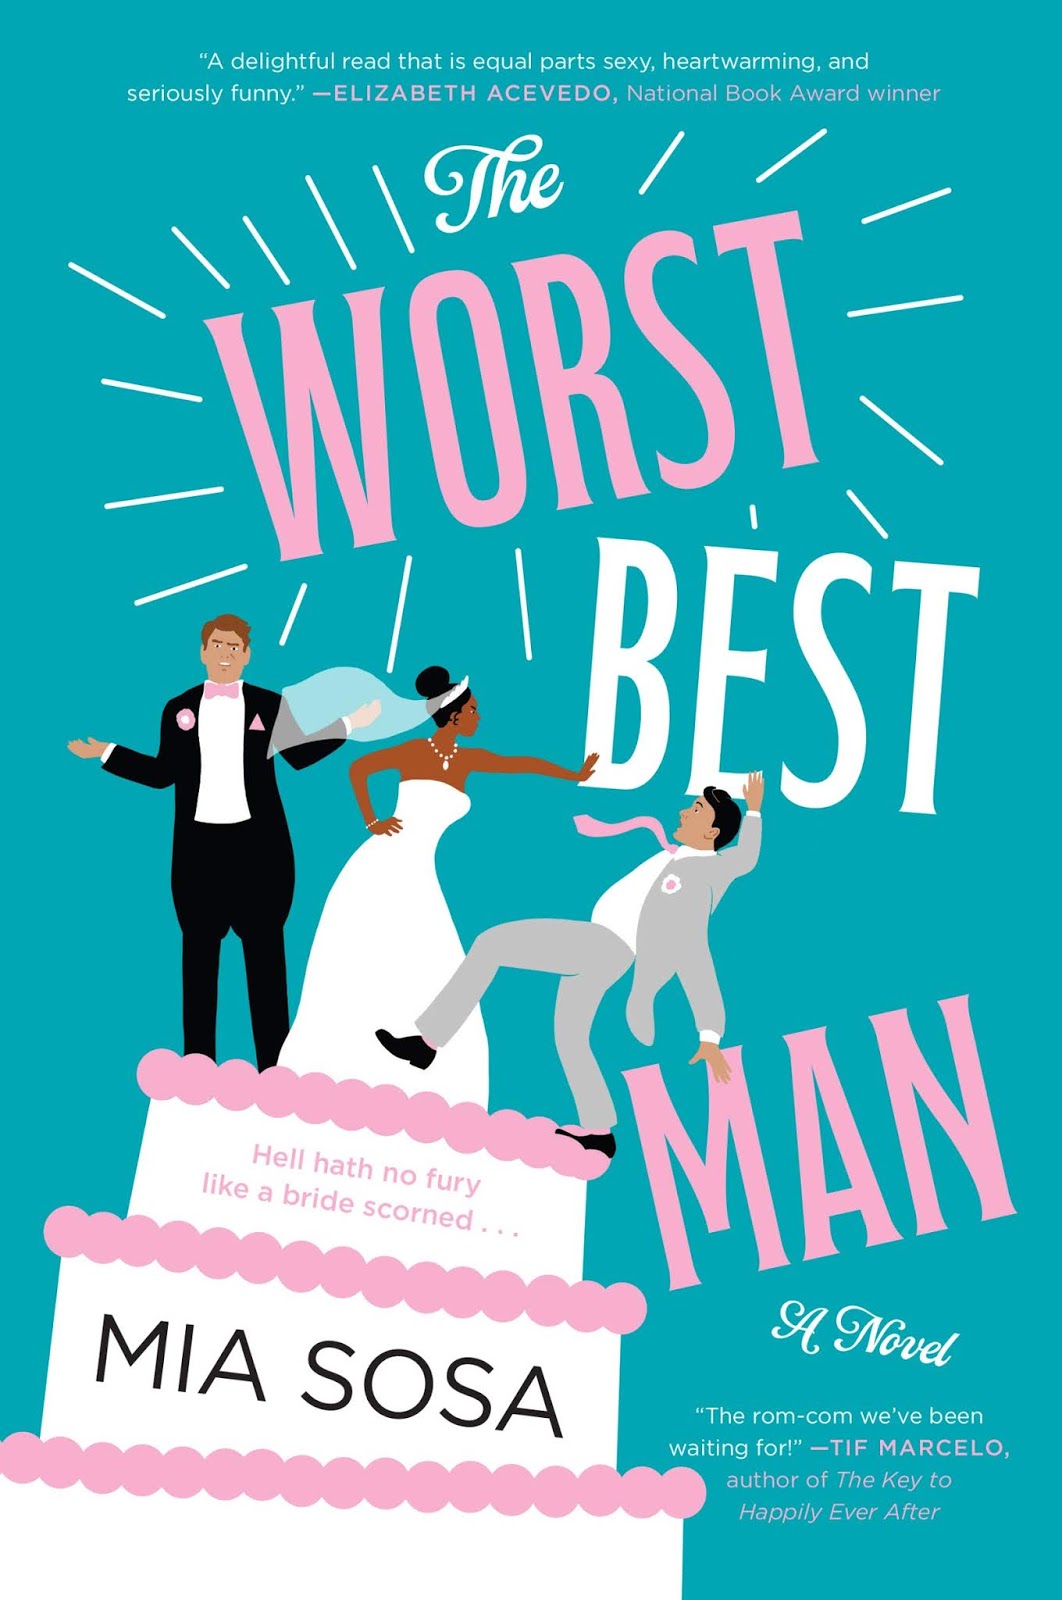 The Romance Dish: Review - - The Worst Best Man